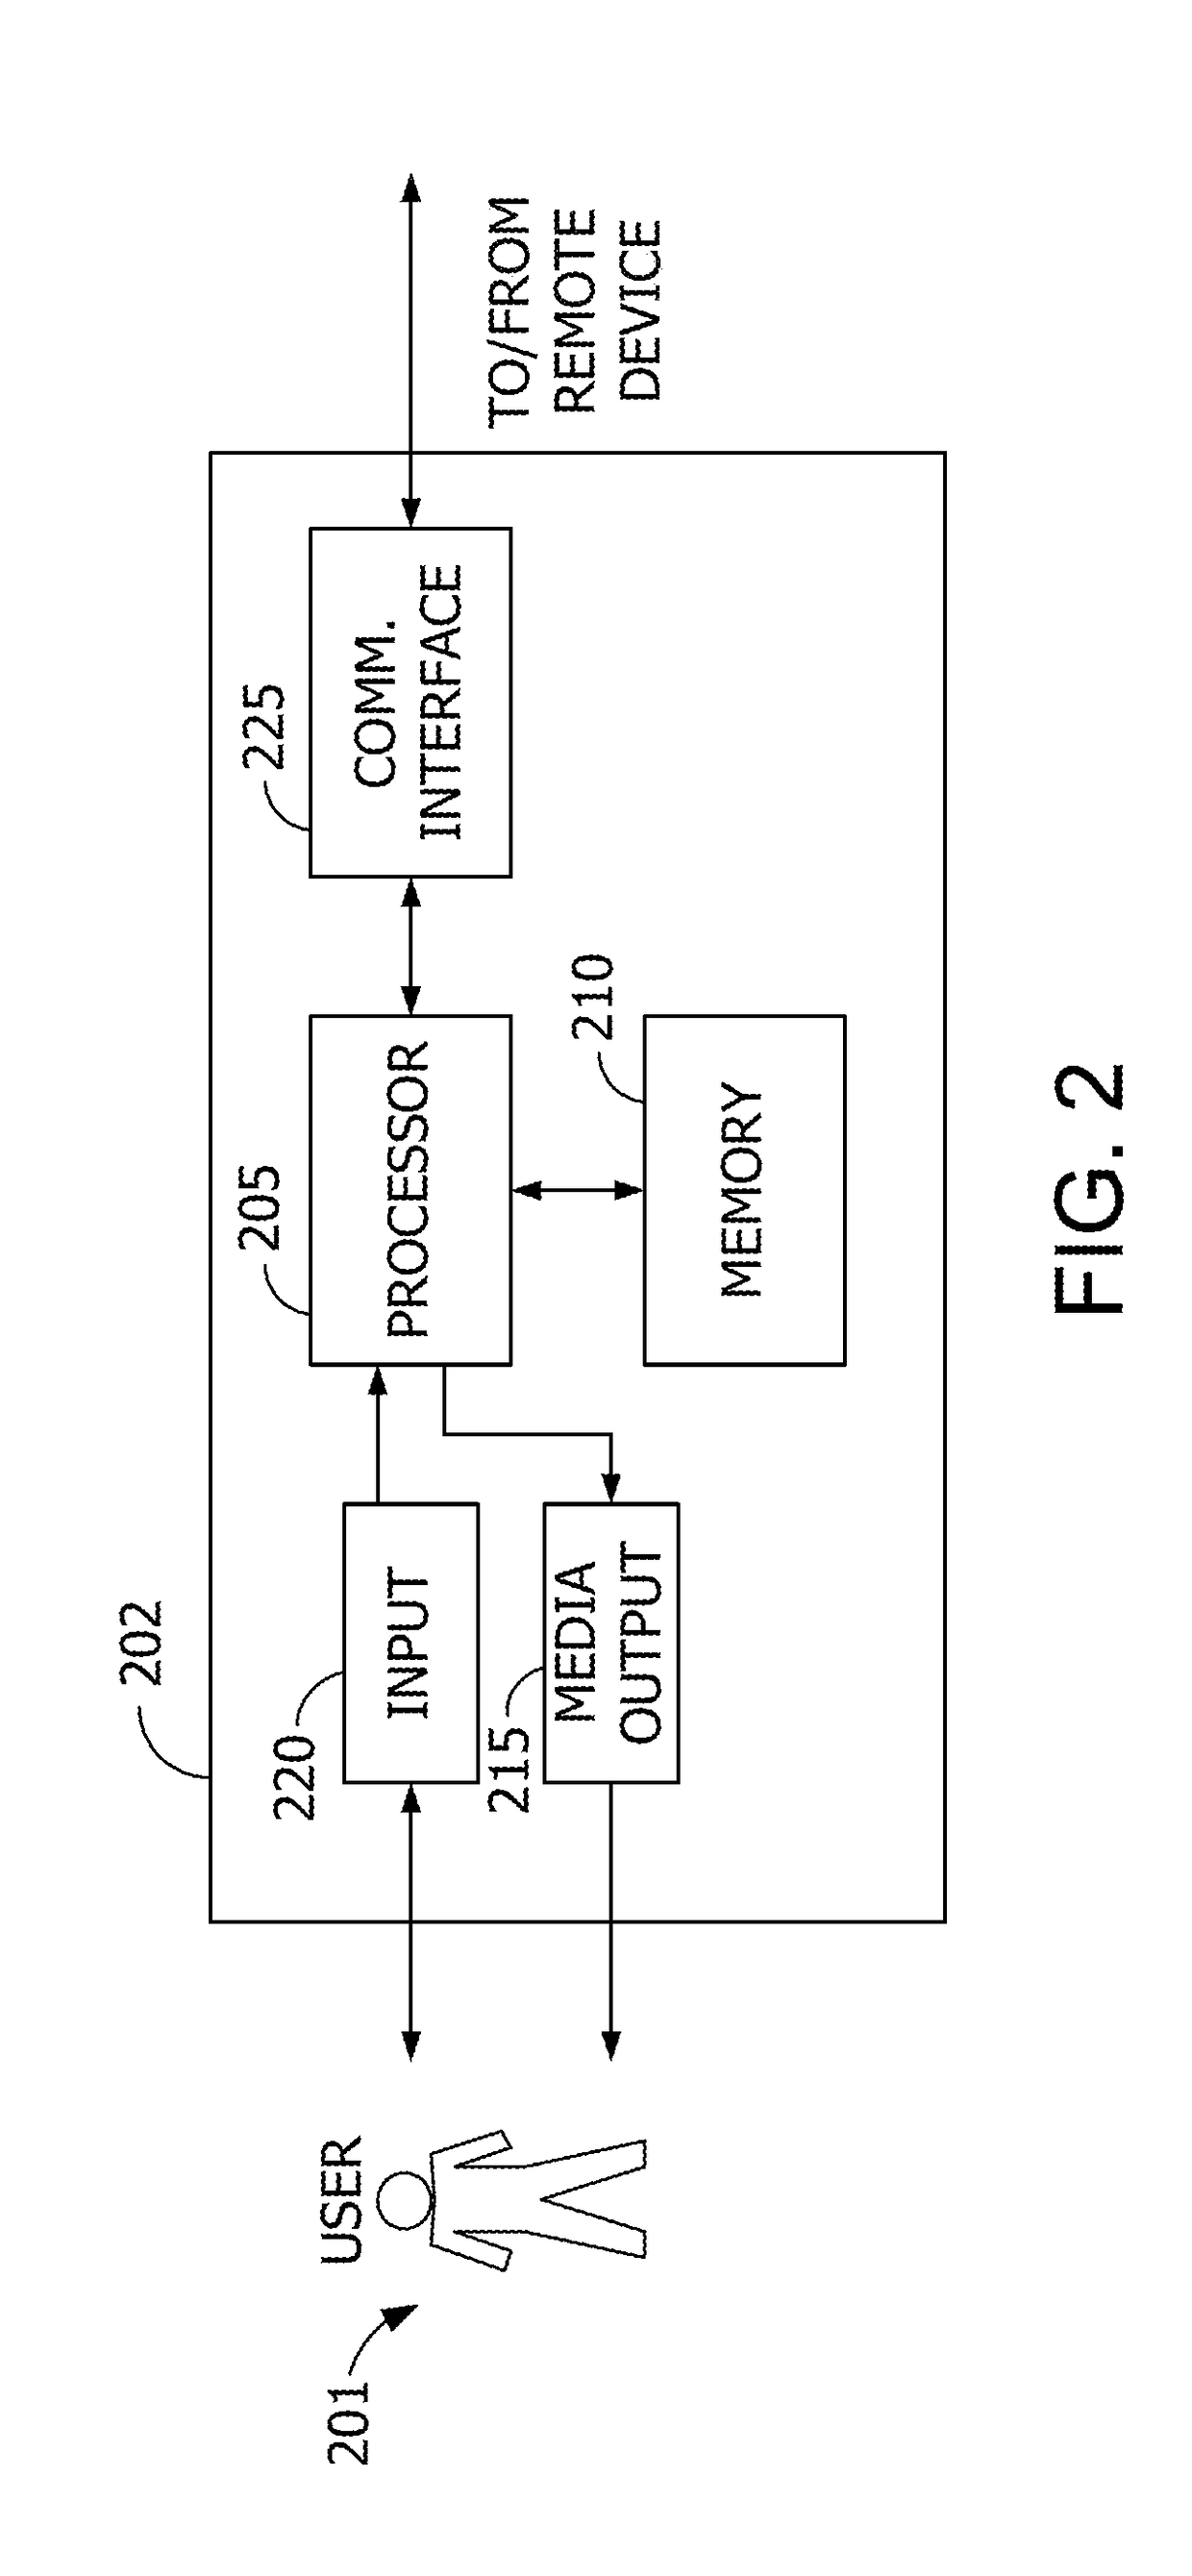 Systems and methods for expedited processing of authenticated computer messages